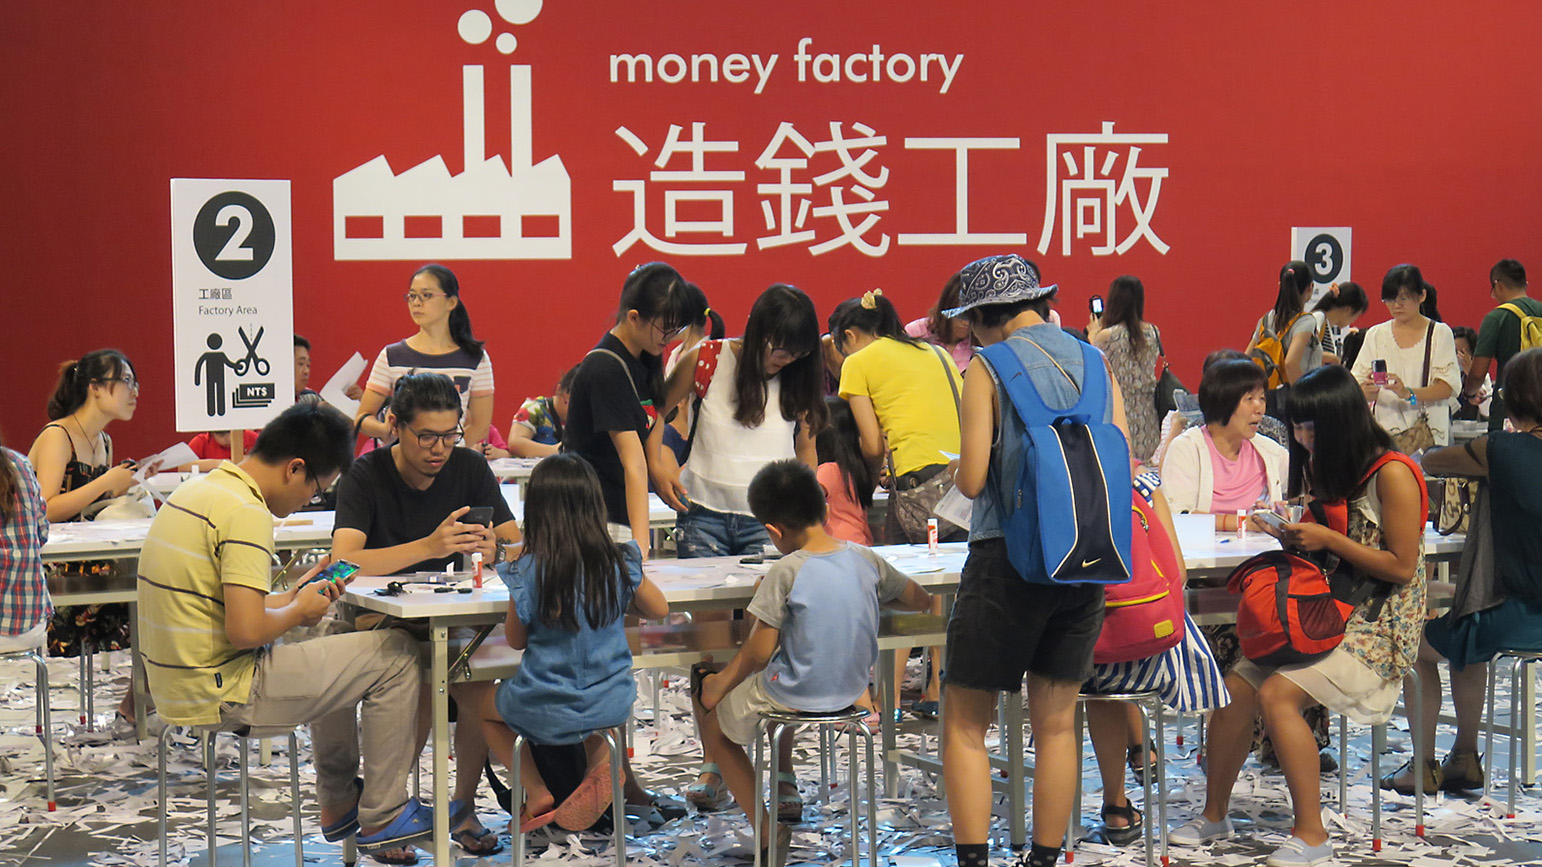 Large group of people sitting at tables with scraps of paper littering the floor and the words "money factory" on the wall behind them